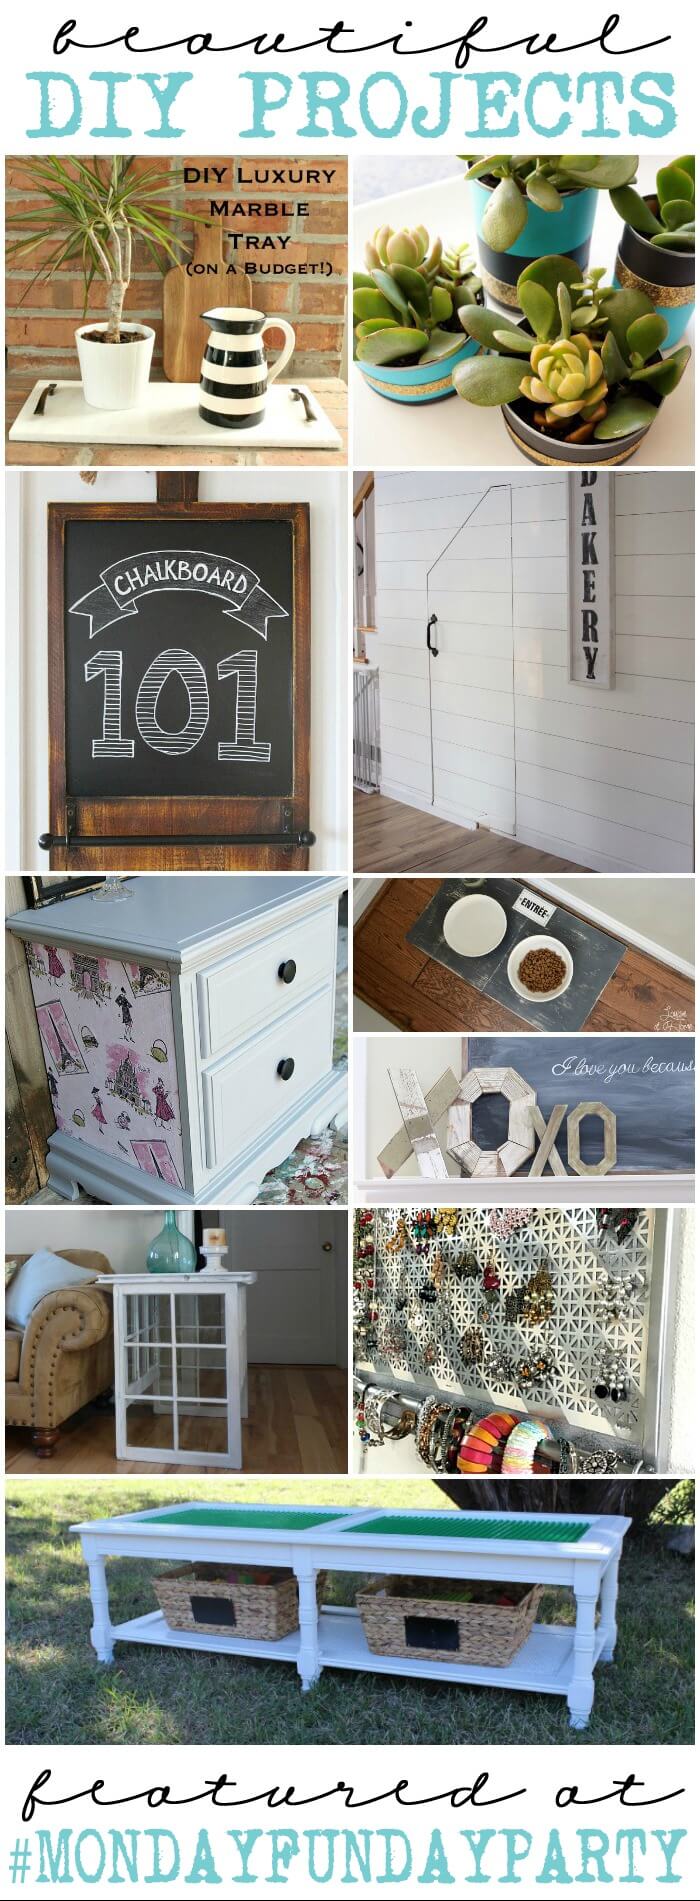 10 Beautiful DIY Projects from Monday Funday Link Party at www.thatswhatchesaid.com